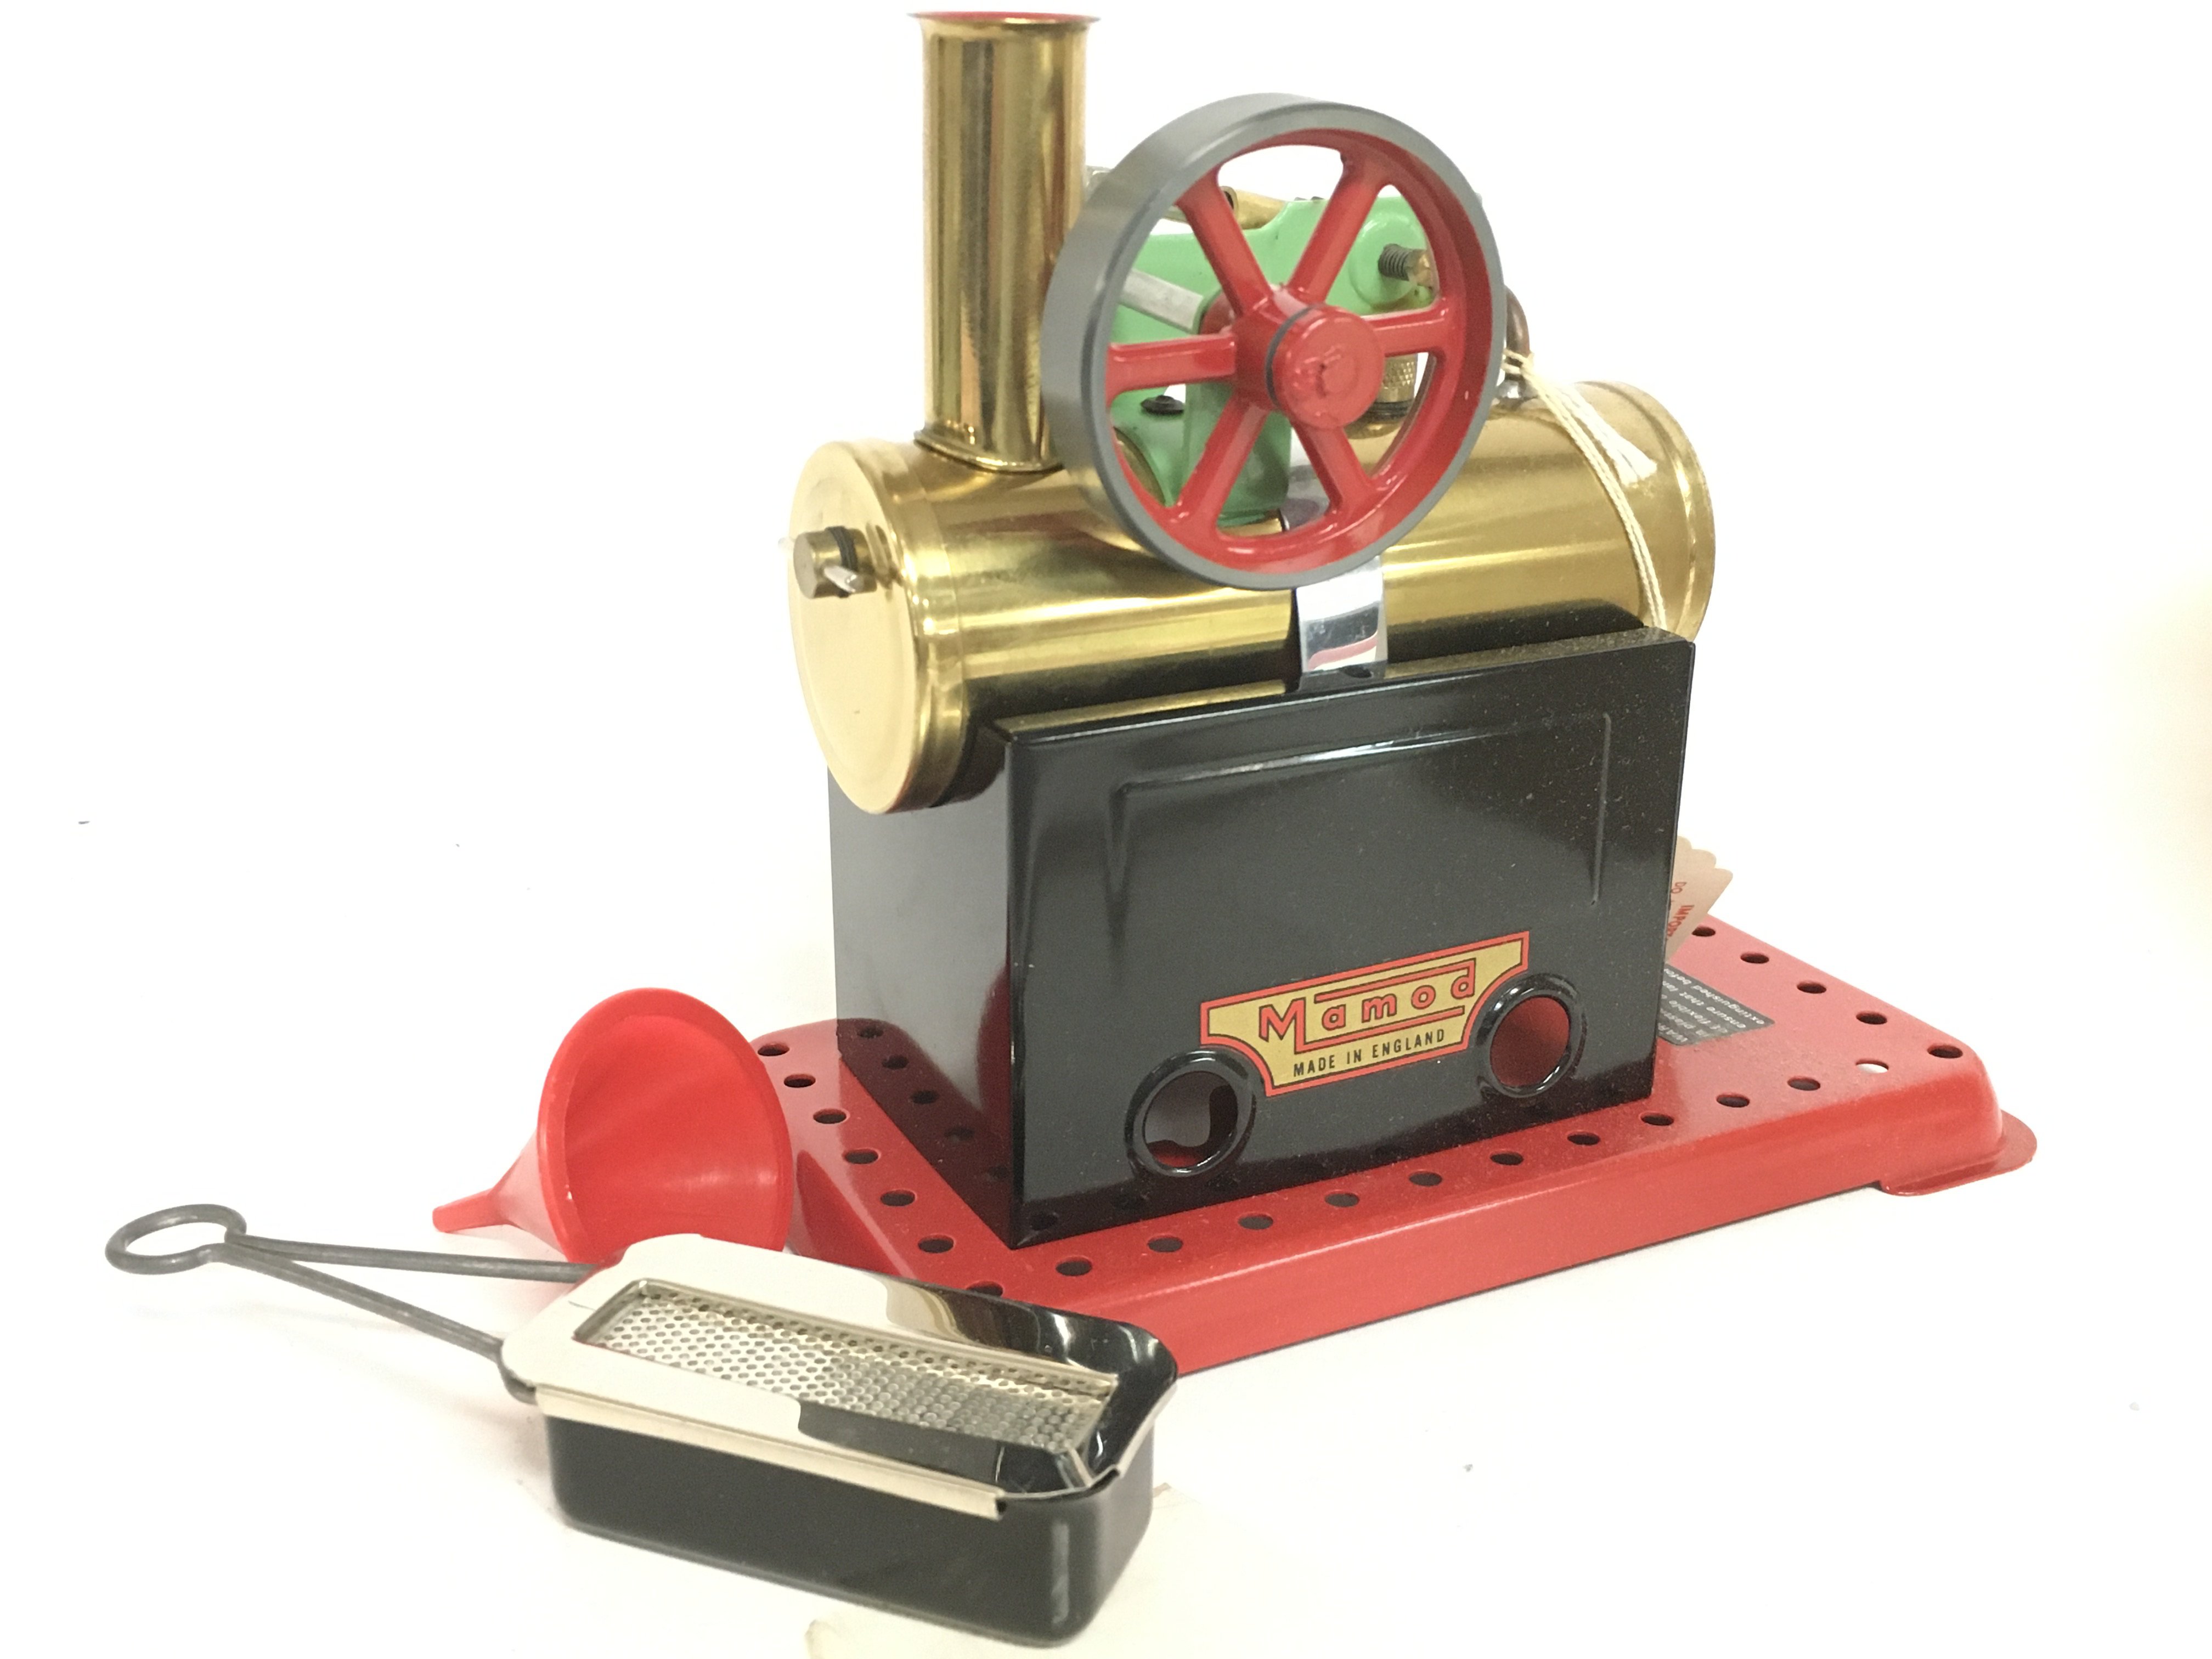 A Boxed Mamod Minor 2 Steam Engine, postage catego - Image 2 of 3